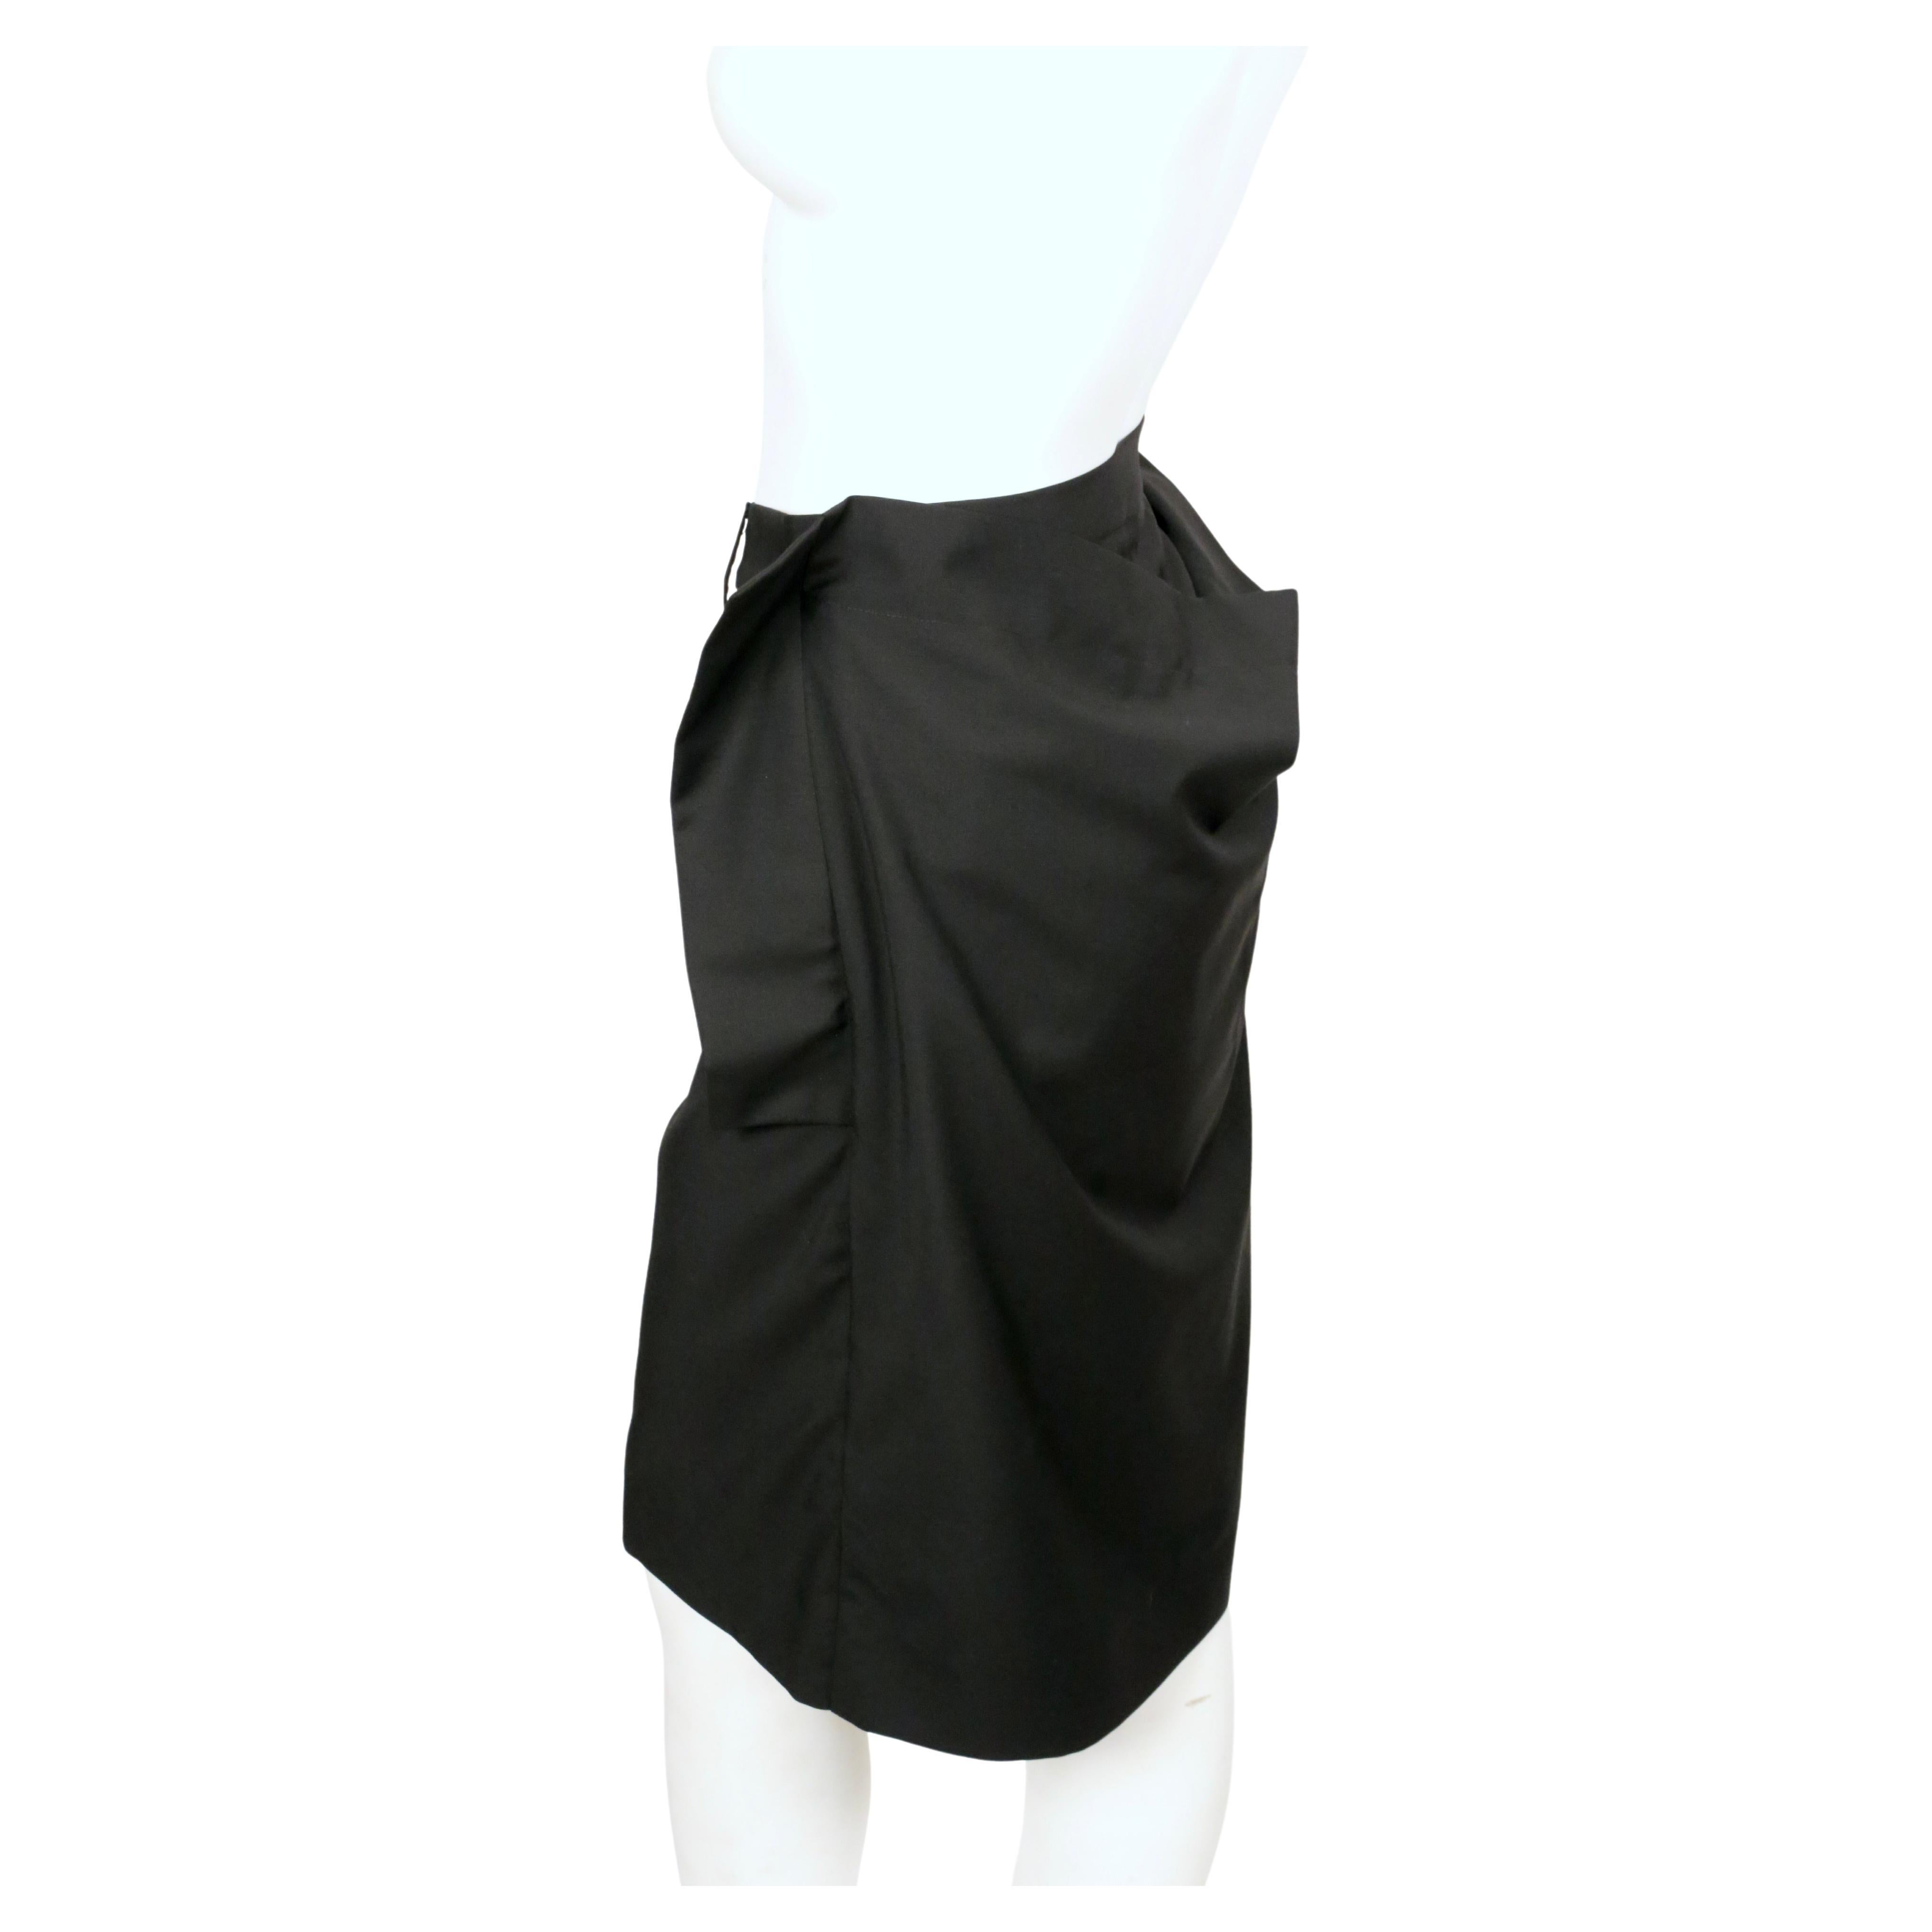 VIVIENNE WESTWOOD black draped top and skirt suit For Sale 3